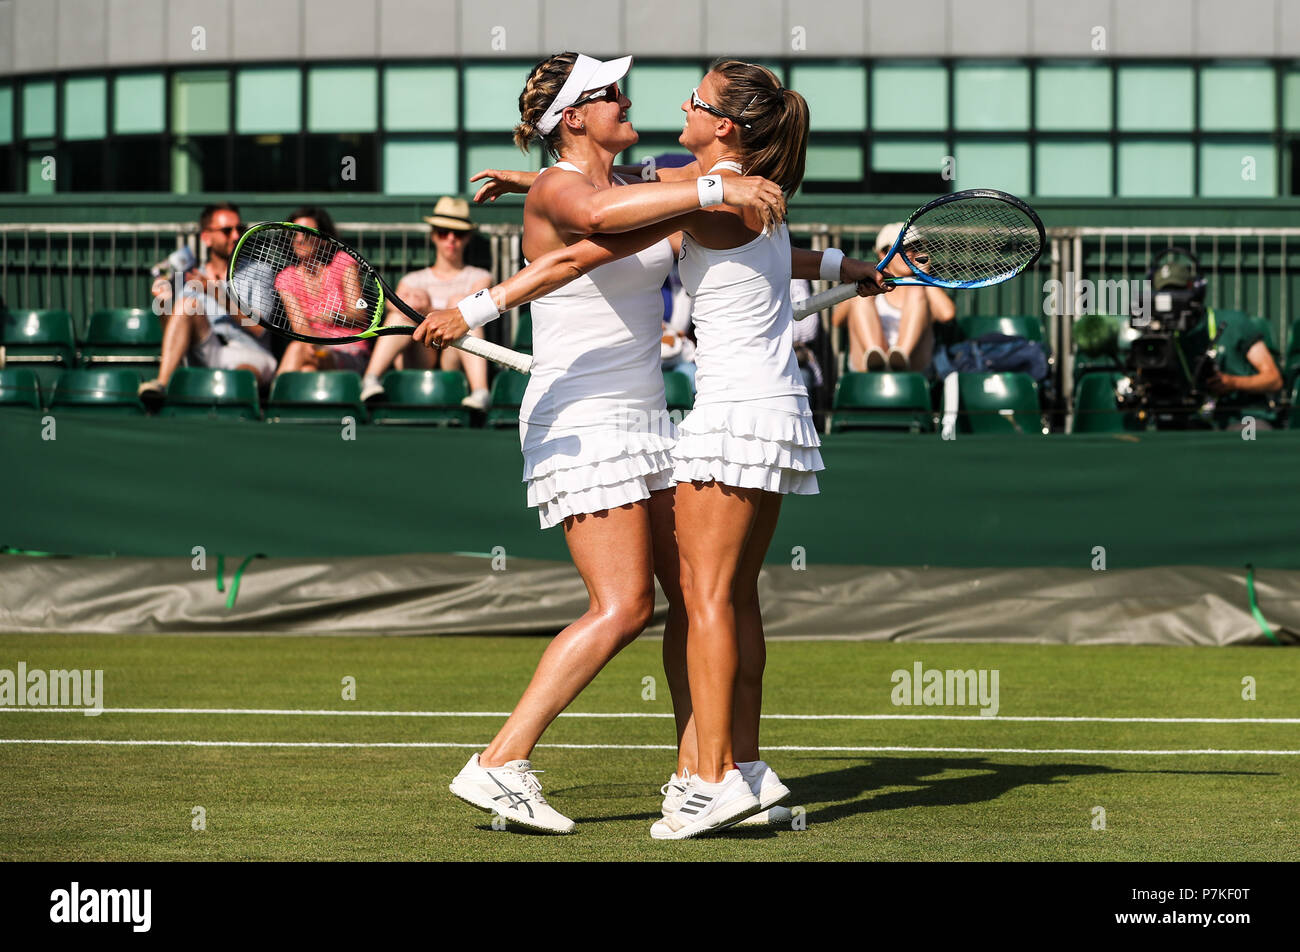 London, UK. 6th July, 2018. Abigail Spears (L) of the United States and Alicja Rosolska of Poland cekebrate during the women's doubles second round match against Peng Shuai of China and Latisha Chan of Chinese Taipei at the Wimbledon Championships 2018 in London, Britain on July 6, 2018. Abigail Spears and Alicja Rosolska won 2-0. Credit: Tang Shi/Xinhua/Alamy Live News Stock Photo